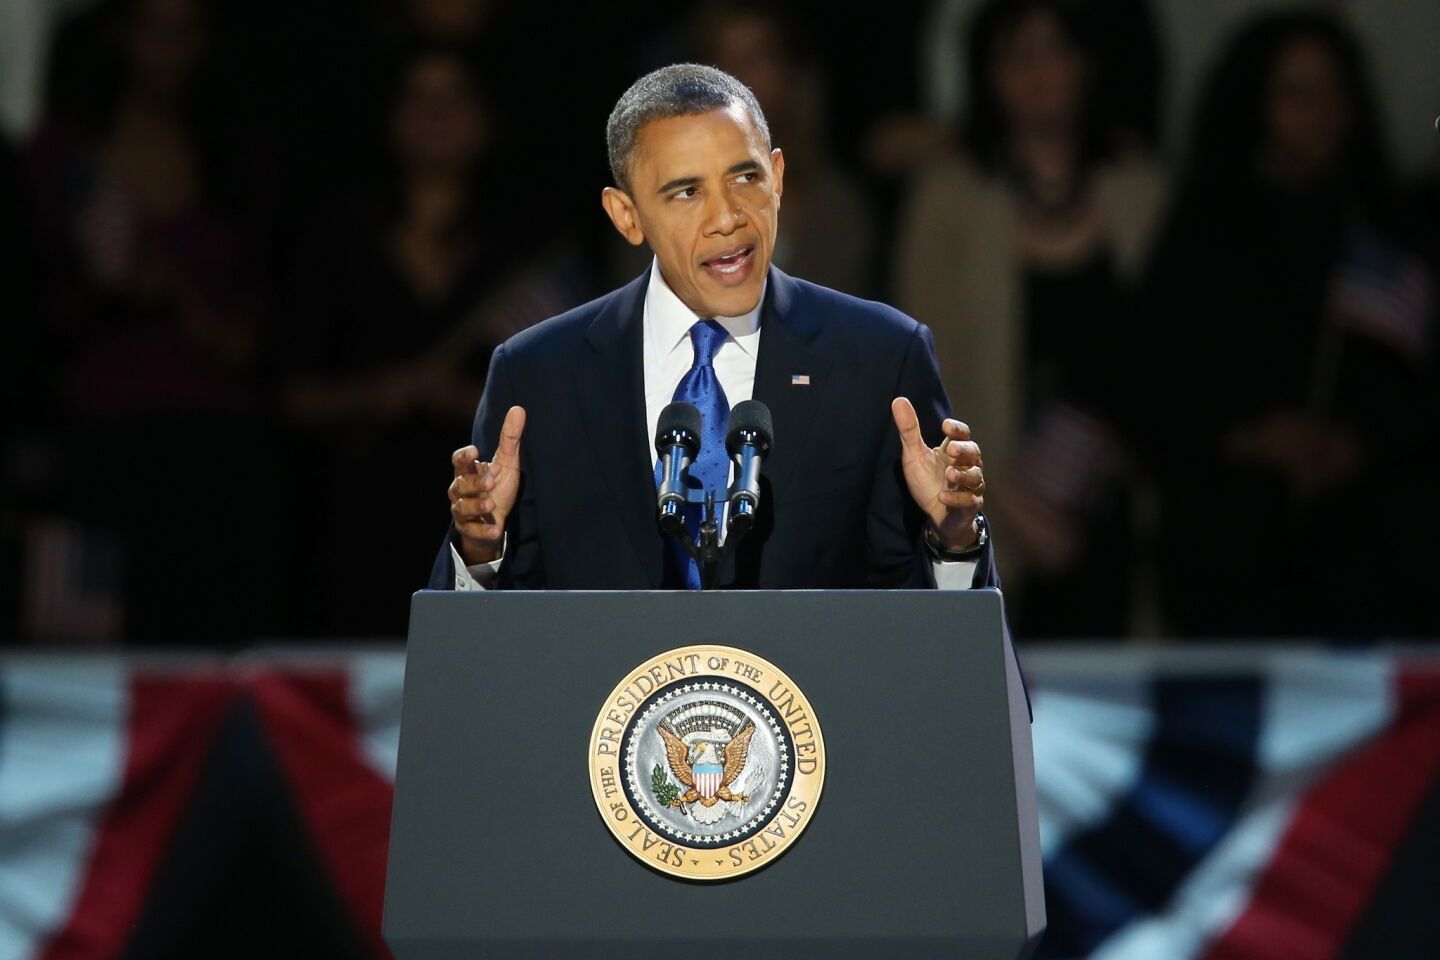 President Obama delivers his victory speech at McCormick Place in Chicago after being reelected to a second term.